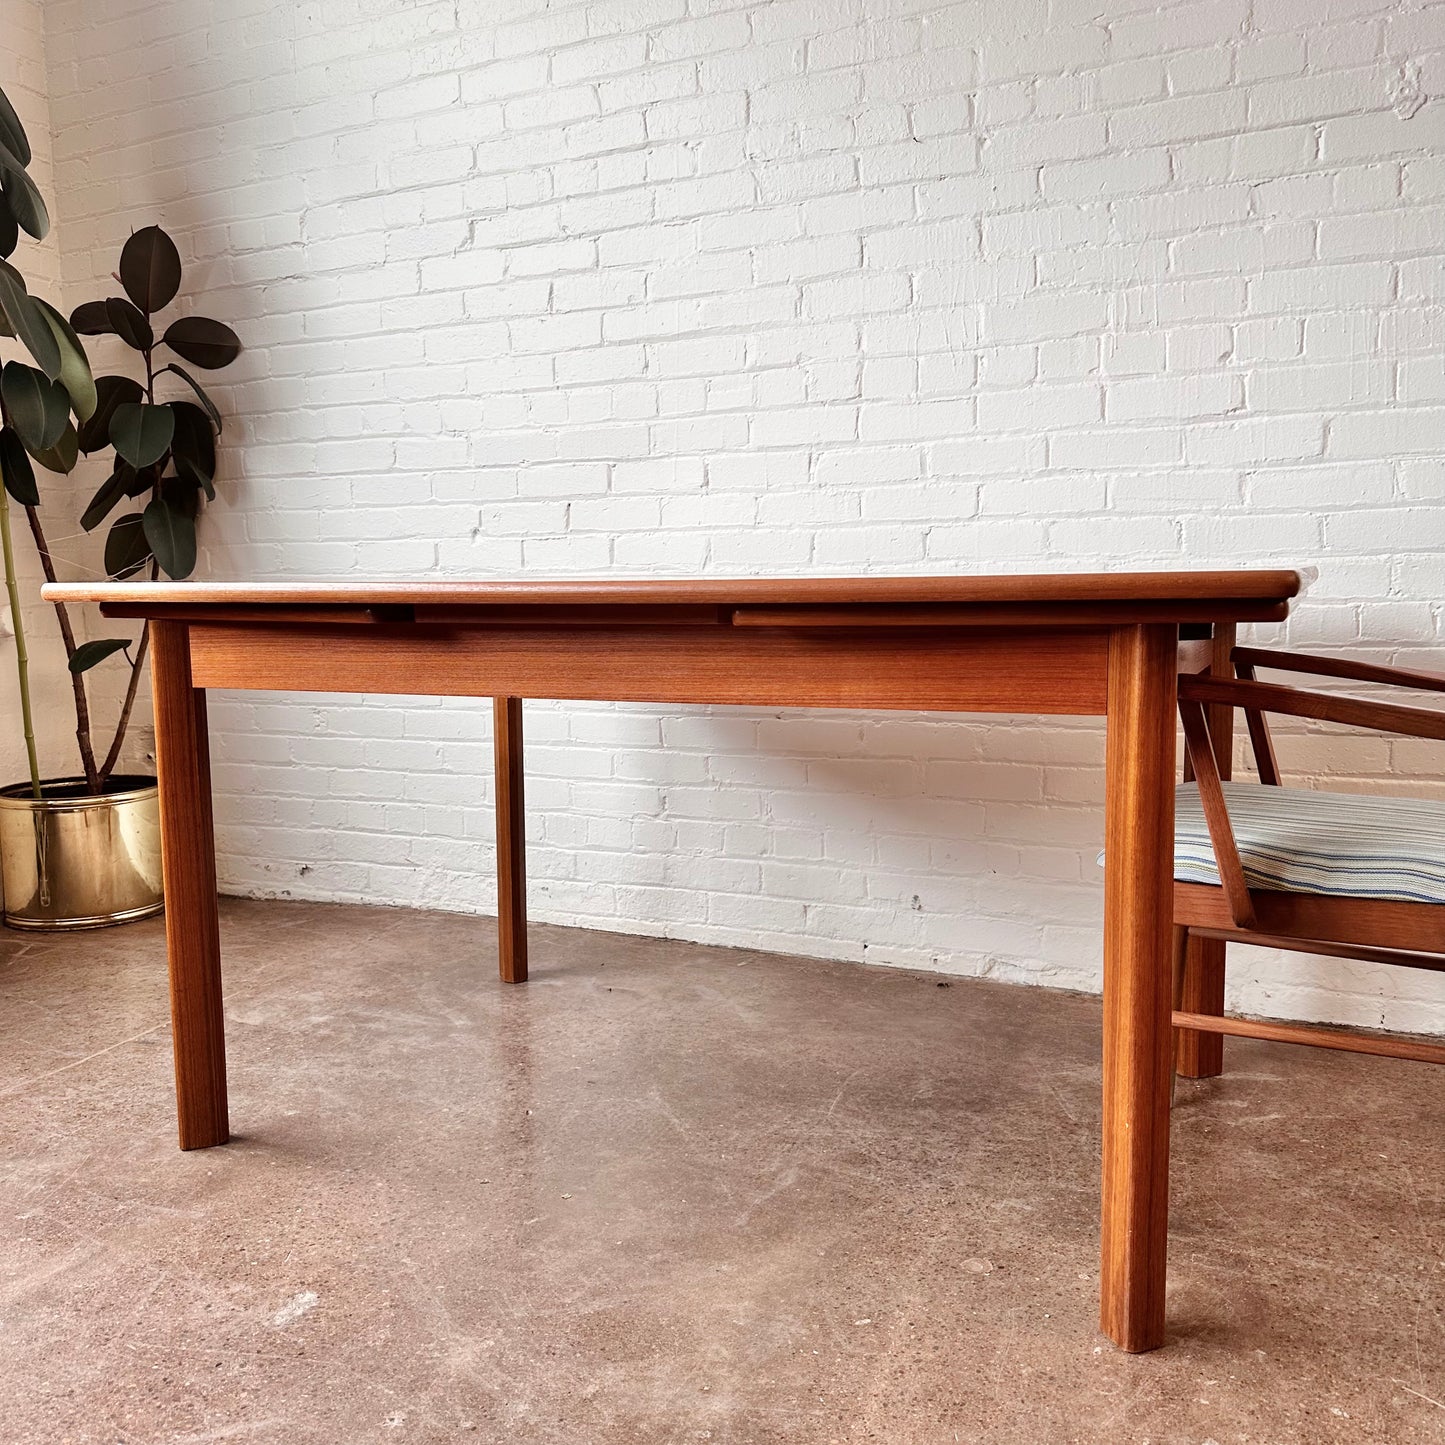 DANISH TEAK DINING TABLE WITH DRAW LEAVES (EXPANDABLE) BOAT-SHAPE - RESTORED